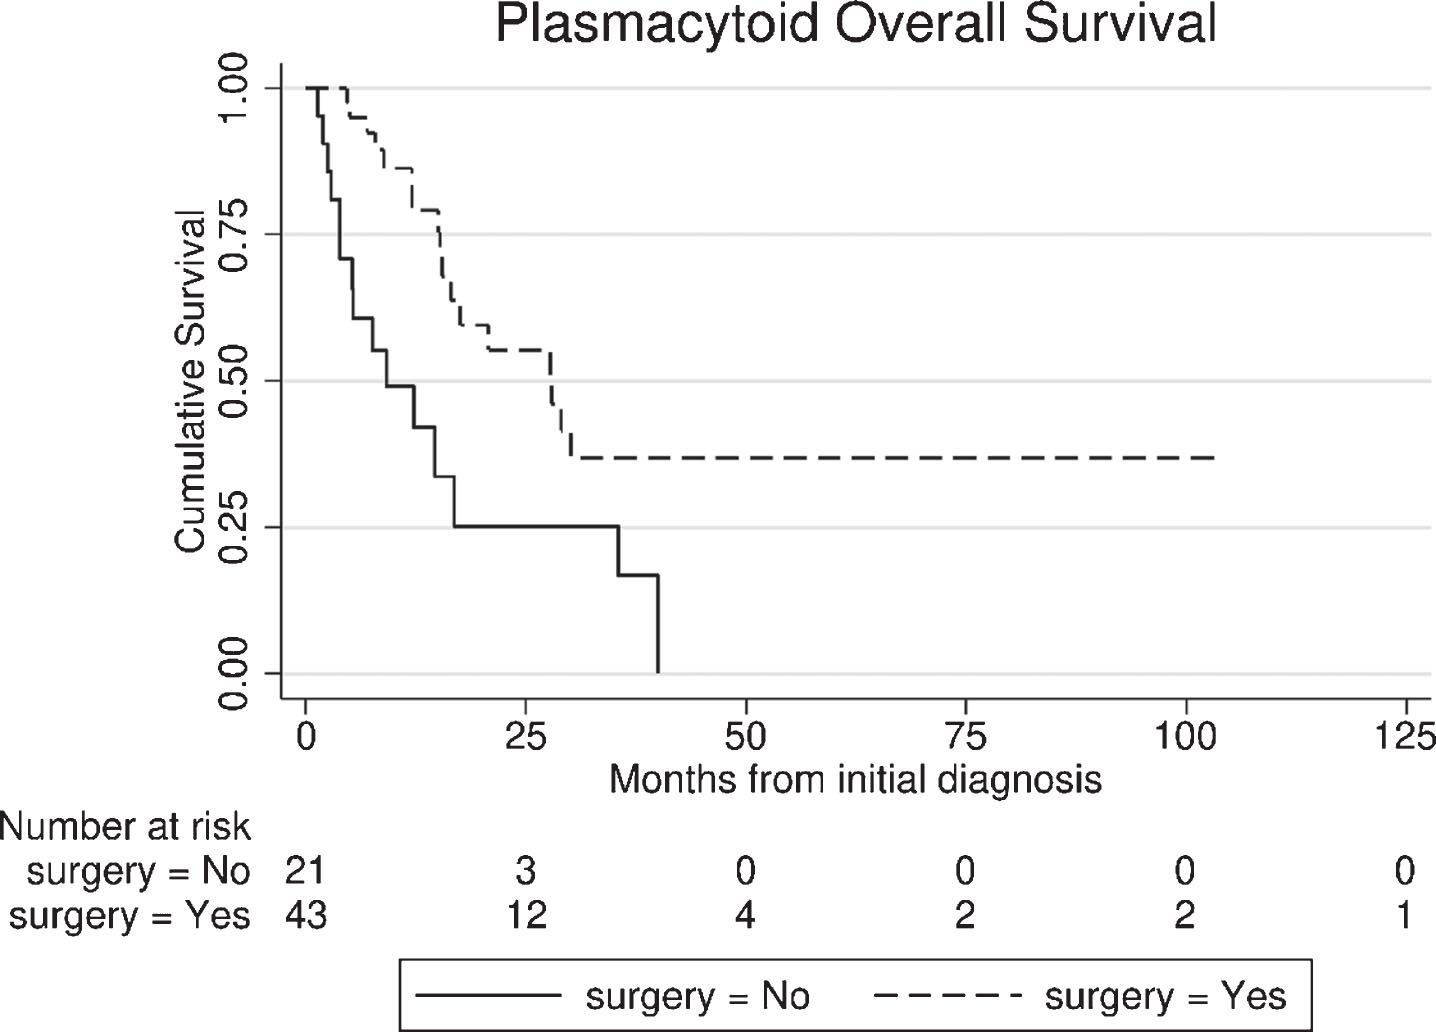 Overall survival (OS) from the time of diagnosis of plasmacytoid urothelial carcinoma (PUC), between surgical and non-surgical group.